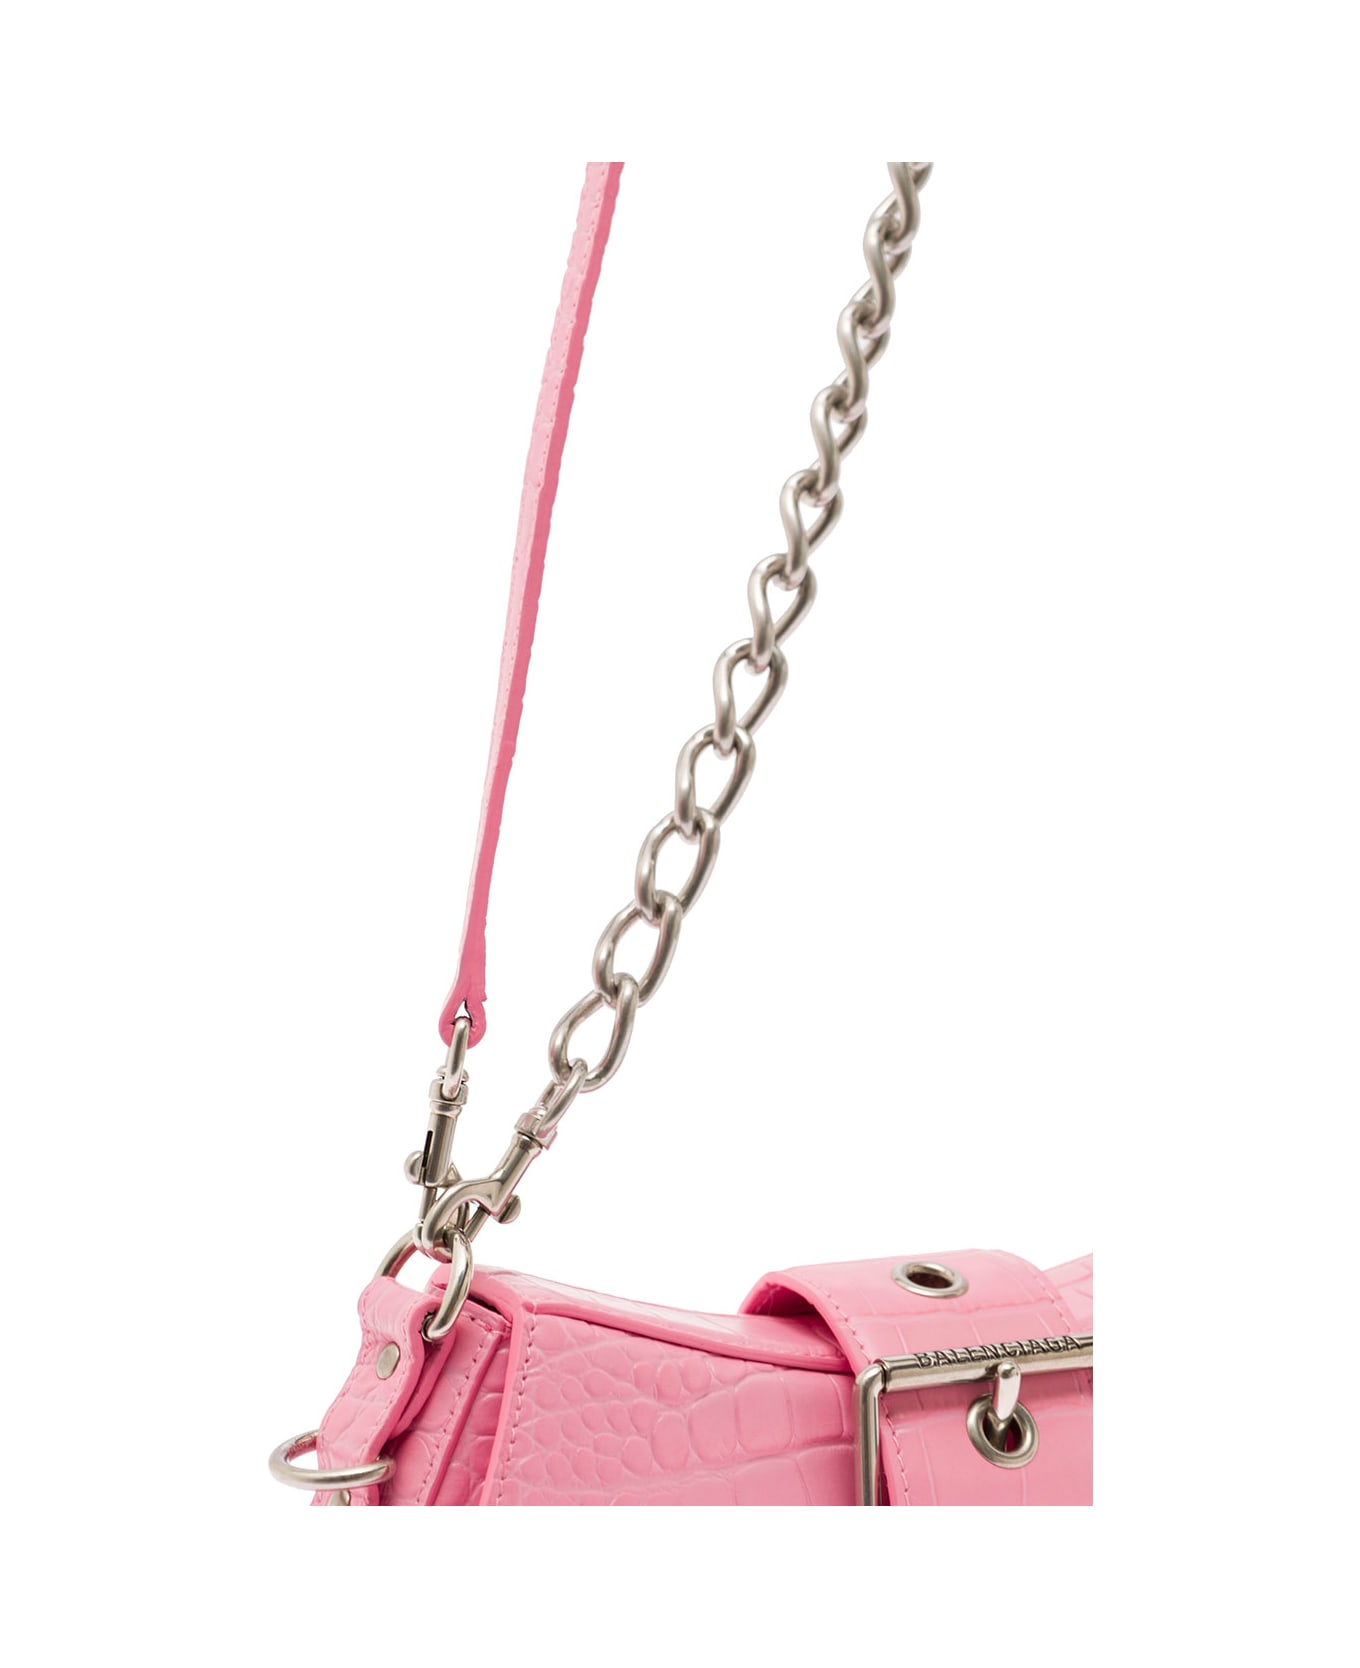 Balenciaga Lindsay Pink Small Shoulder Bag With Strap In Matte Crocodile Embossed Leather Wth Aged-silver Hardware Balenciaga Woman - Pink